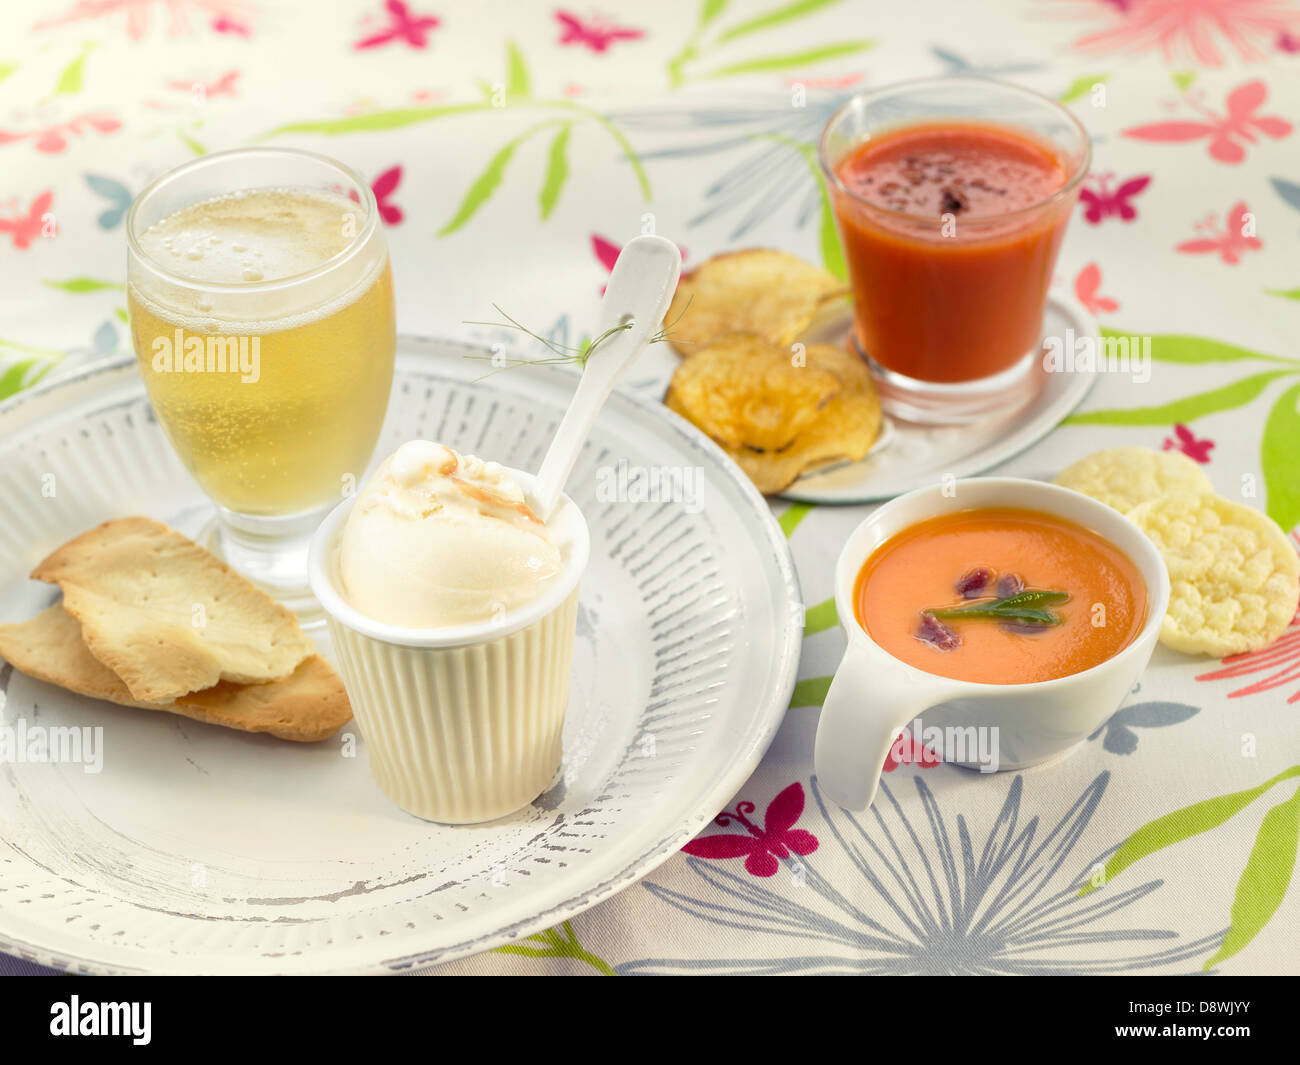 Aperitif with drinks and food Stock Photo